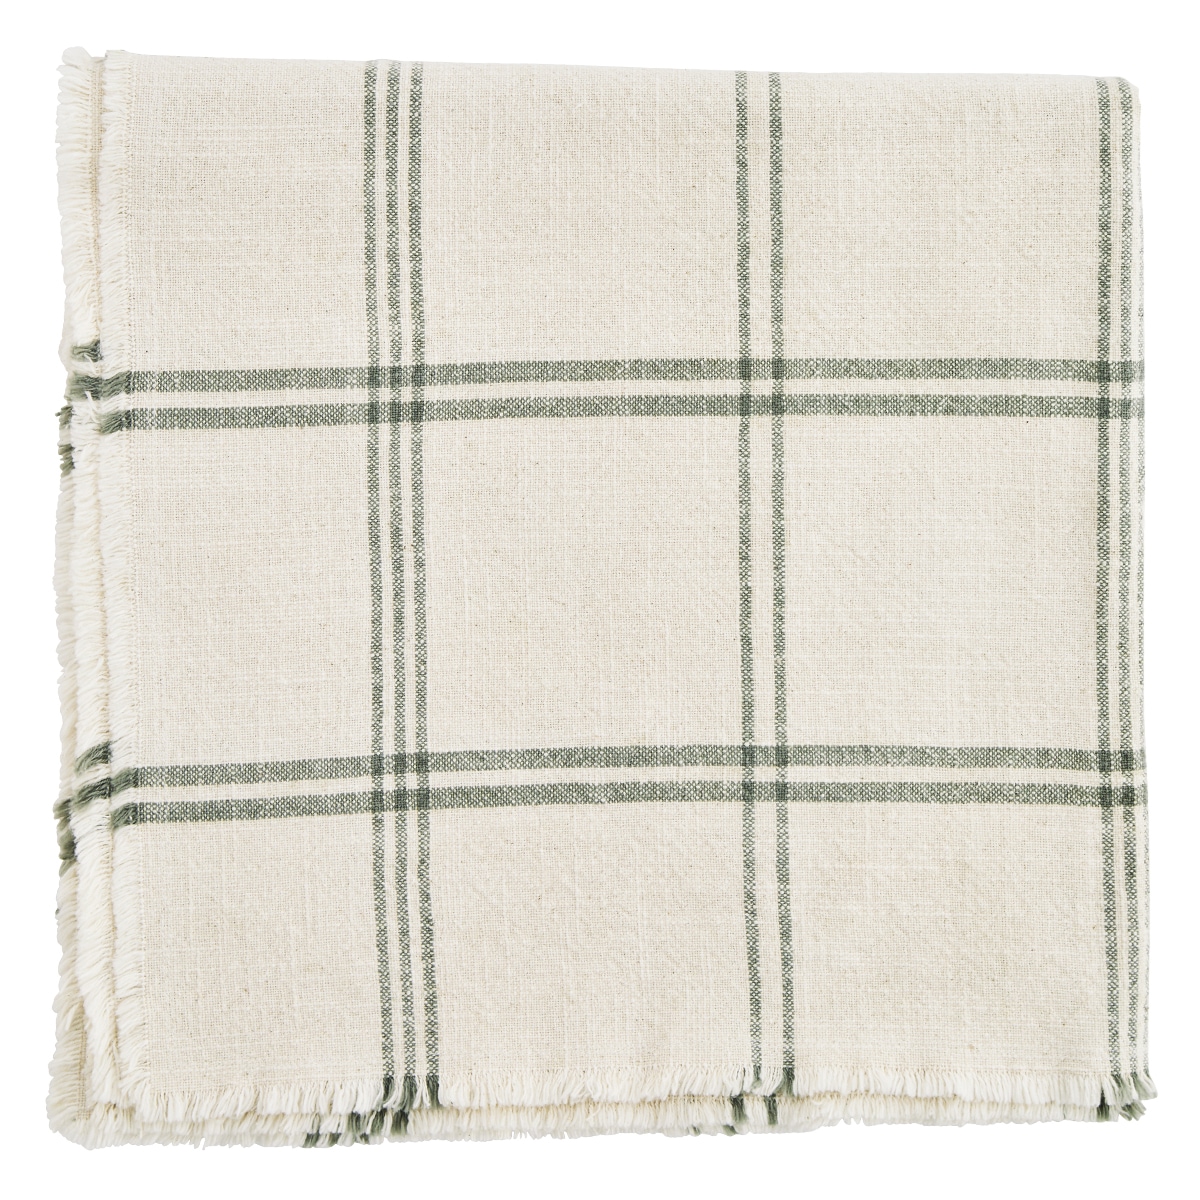 Checked Table Cloth w. Fringes Ecru/Green